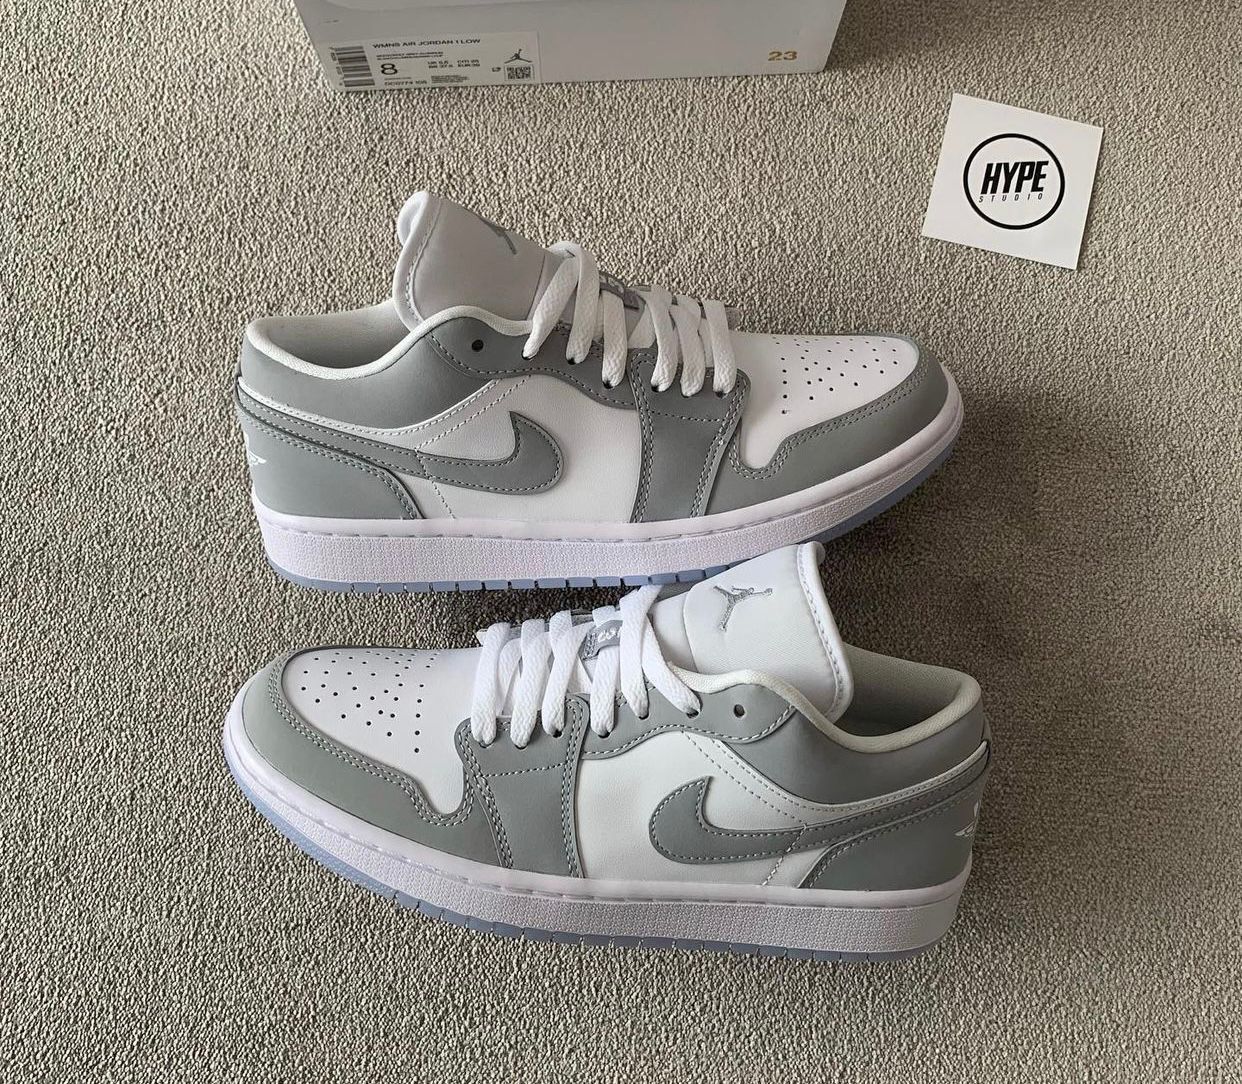 NIKE JORDAN RETRO 1 LOW WOLFGREY - 7a Quality Replicas are the first ...